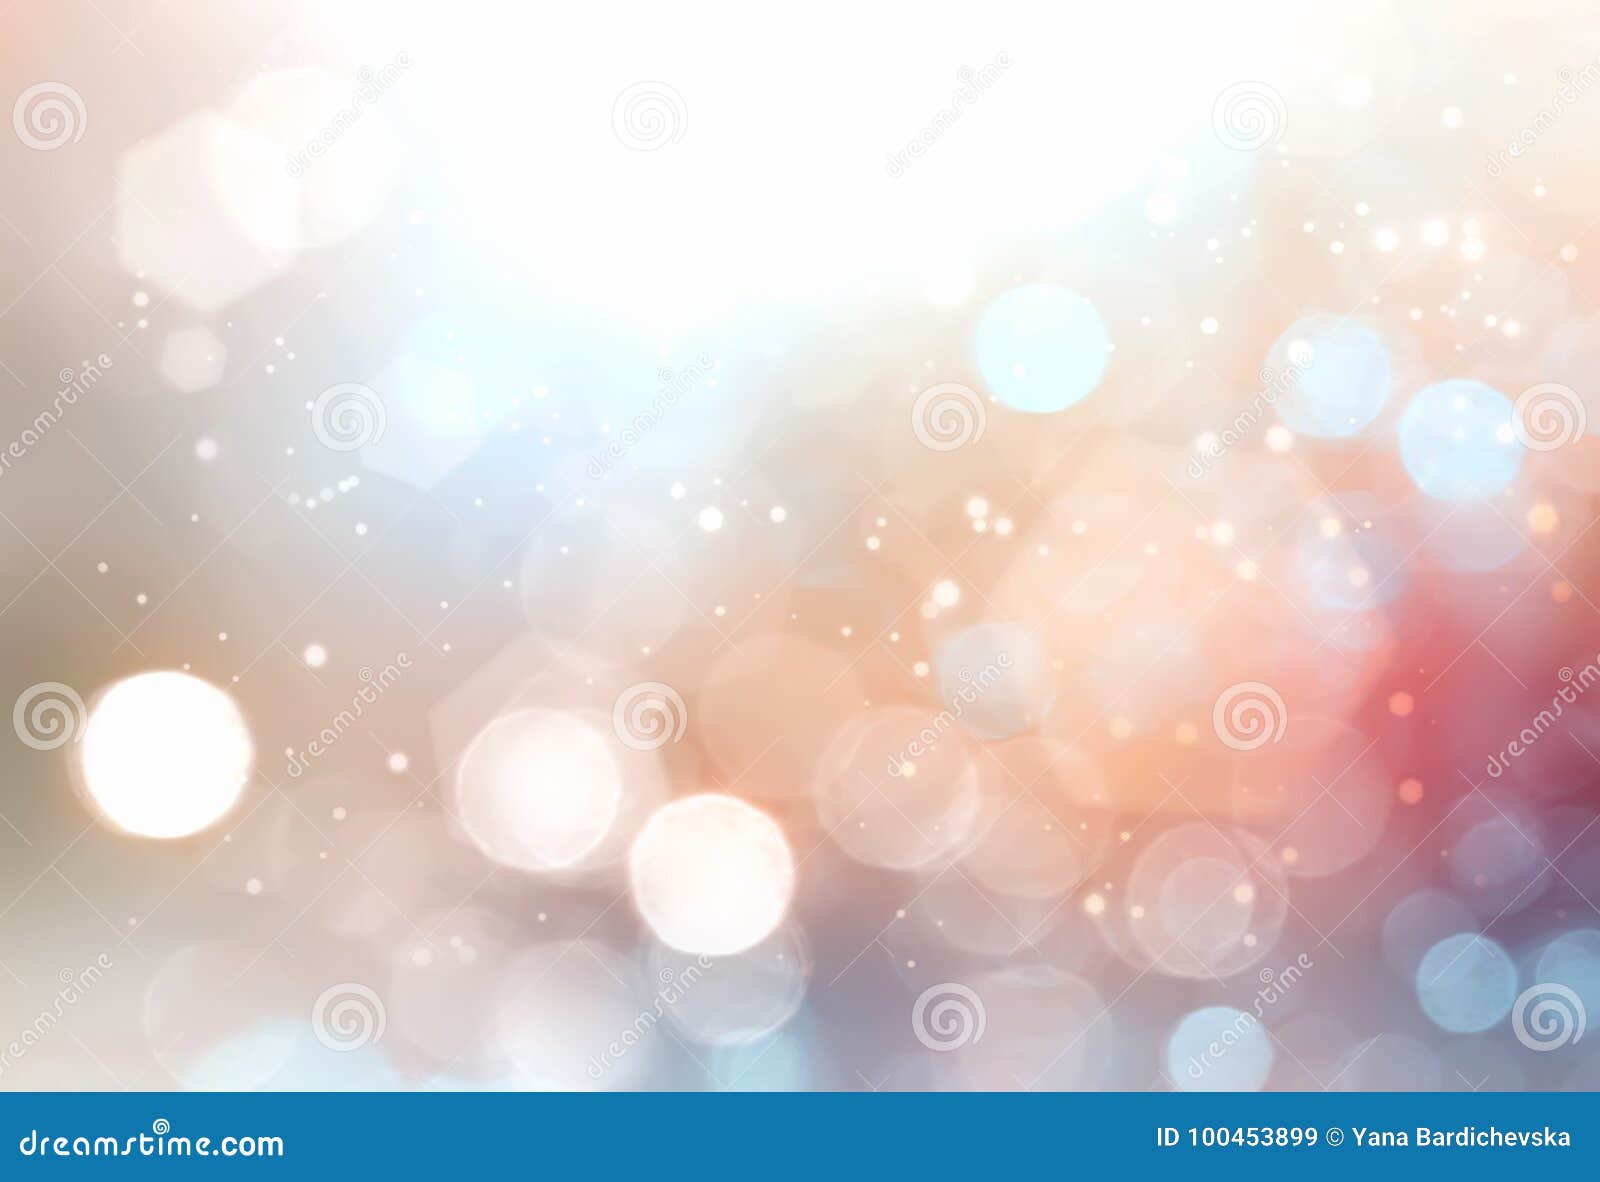 Light Colorful Blurred Background. Stock Illustration - Illustration of  background, season: 100453899